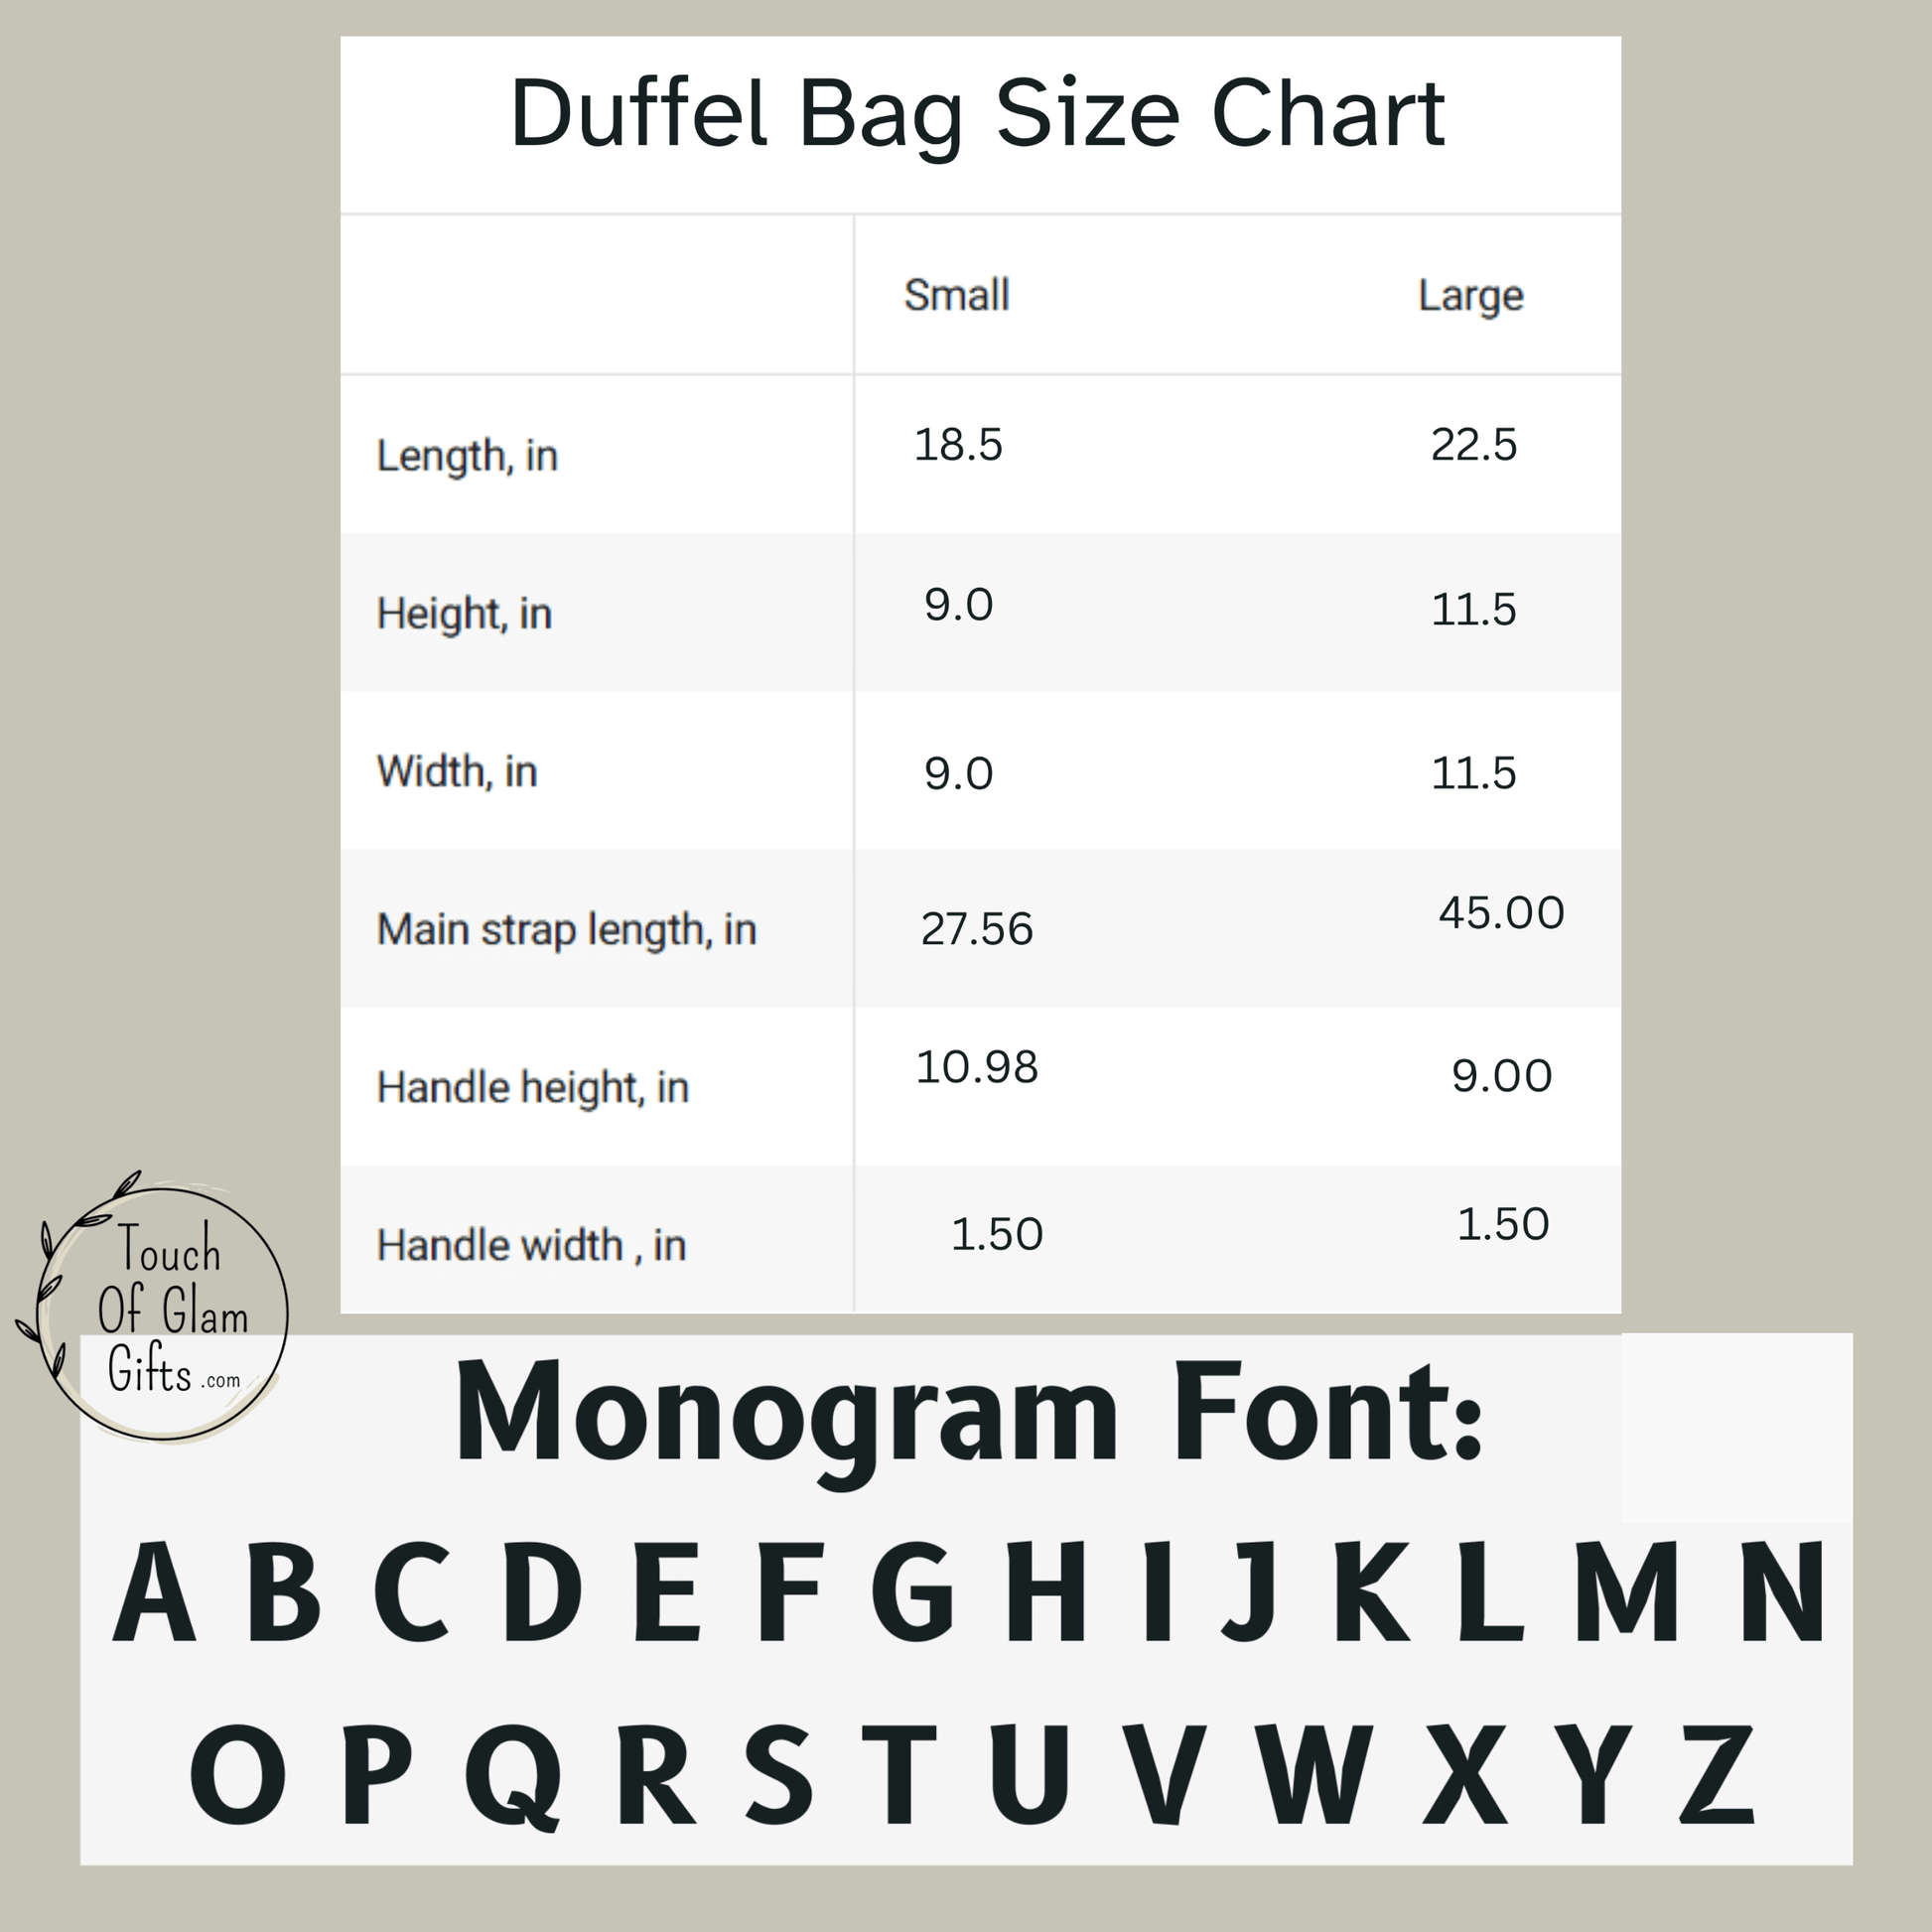 Our duffel bag for men chart comparing the large and small personalized bags. THis also shows the font used for monogramming and the alphabet letters.